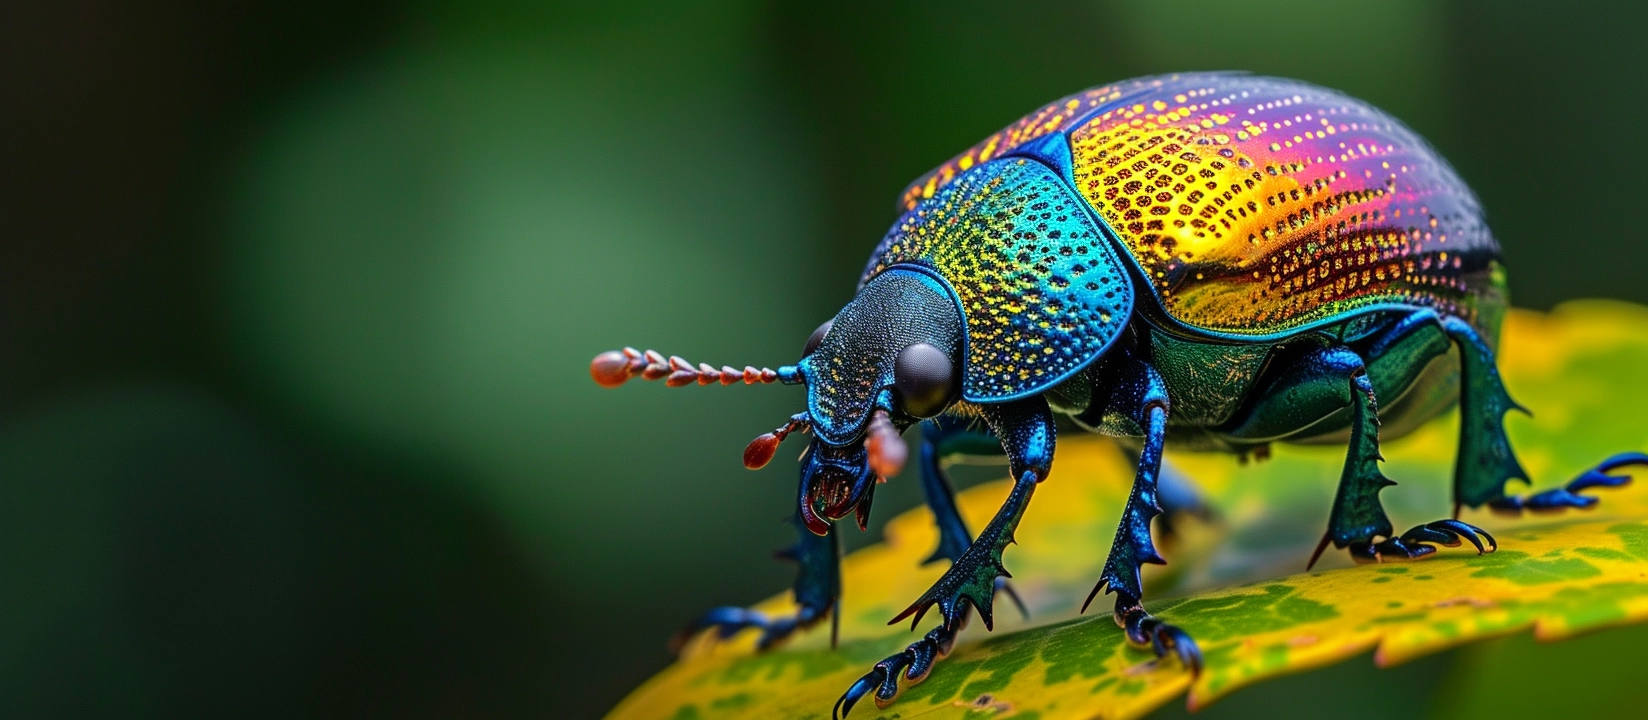 Beetle Spiritual Meaning: Symbolism, Messages, and Interpretations